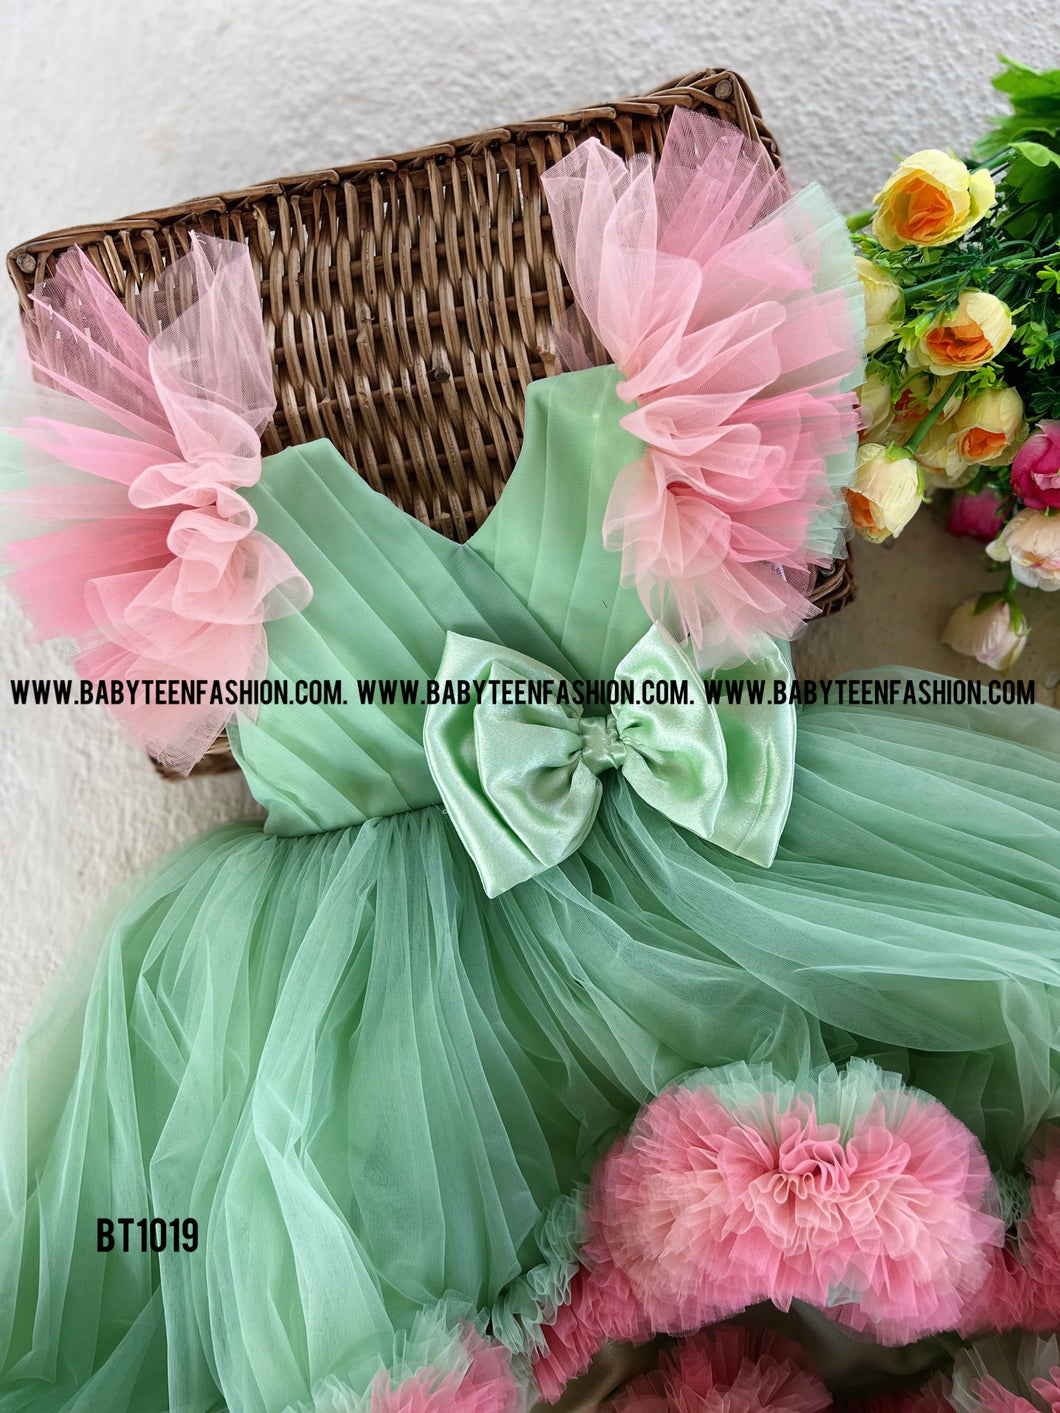 BT1019 Pink Green Fusion Bithday Frock with High Low Pattern and Ruffled Sleeves for Babies and Teenage Girls